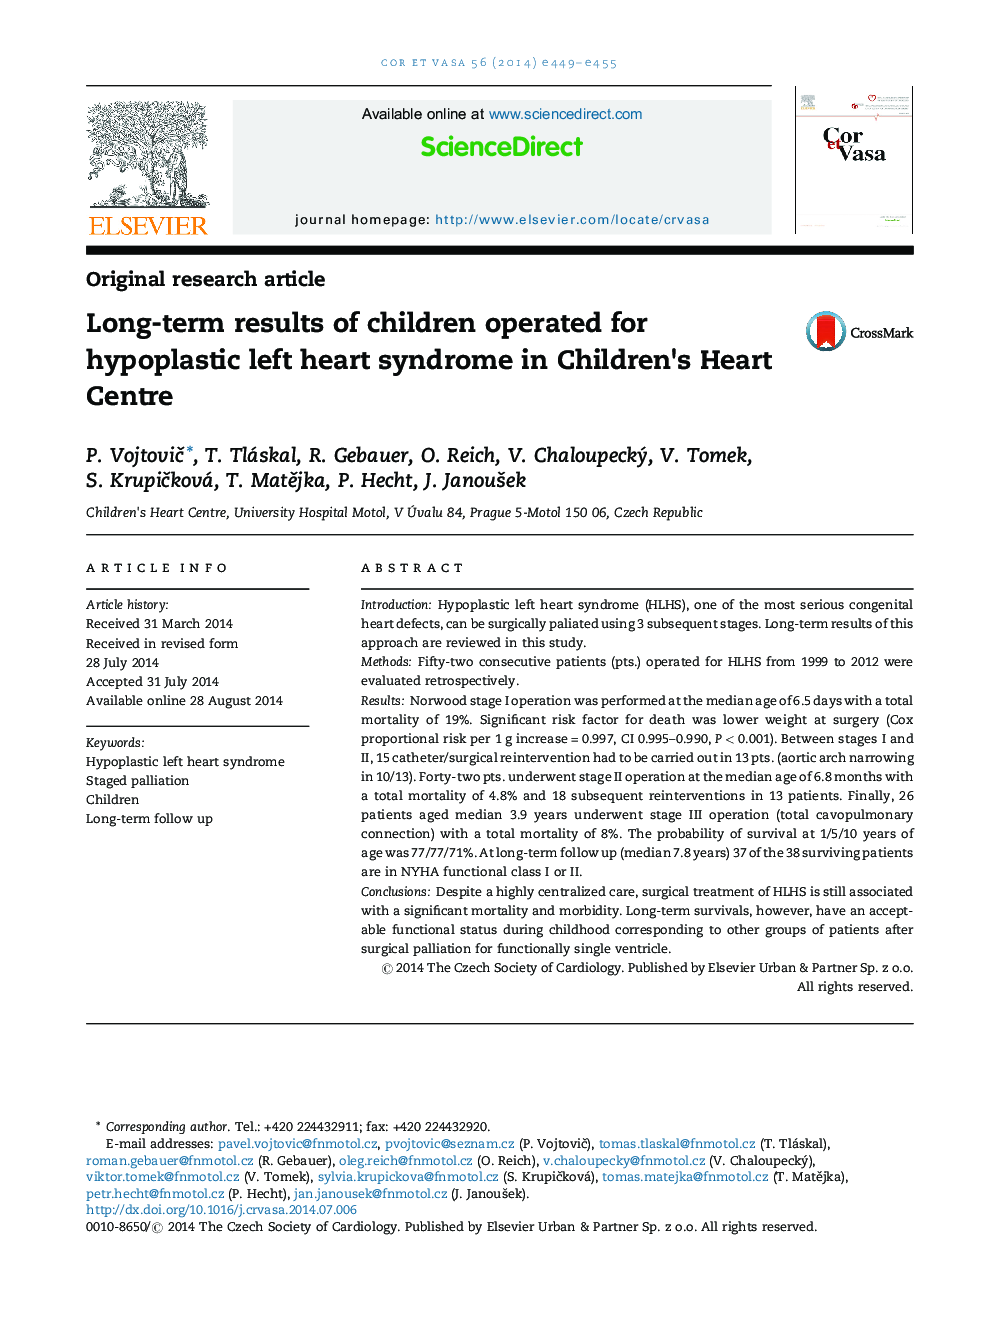 Long-term results of children operated for hypoplastic left heart syndrome in Children's Heart Centre